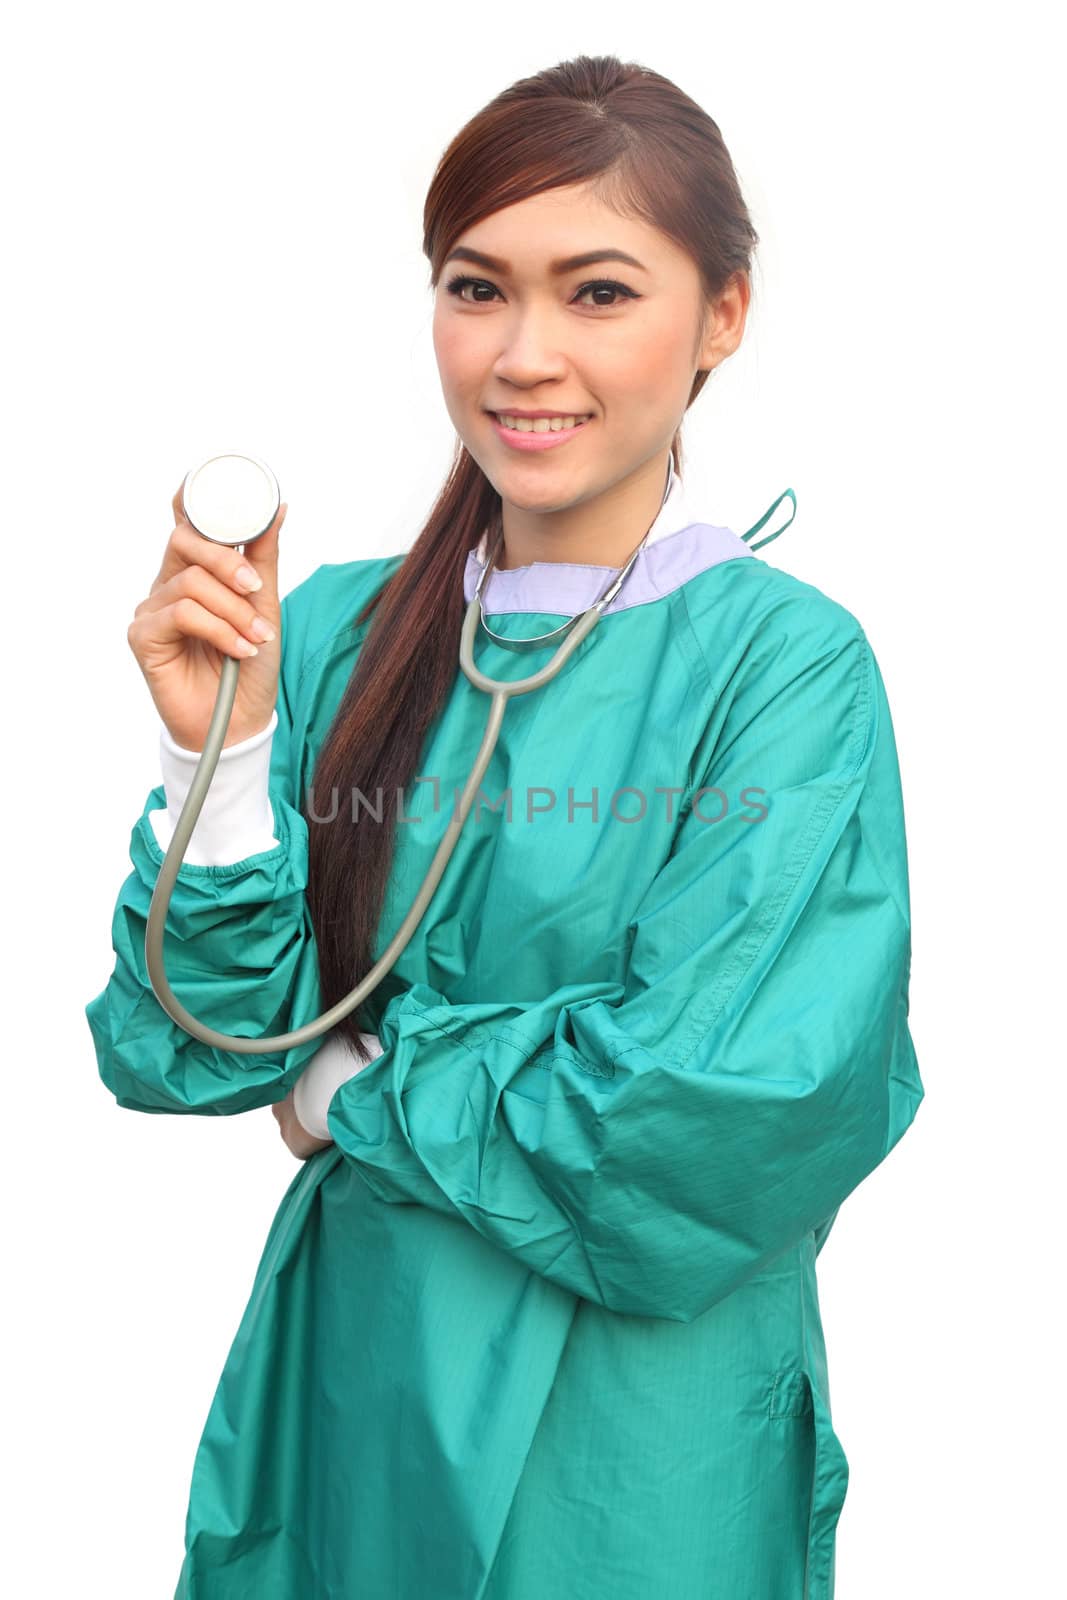 female doctor wearing a green scrubs and stethoscope on white background